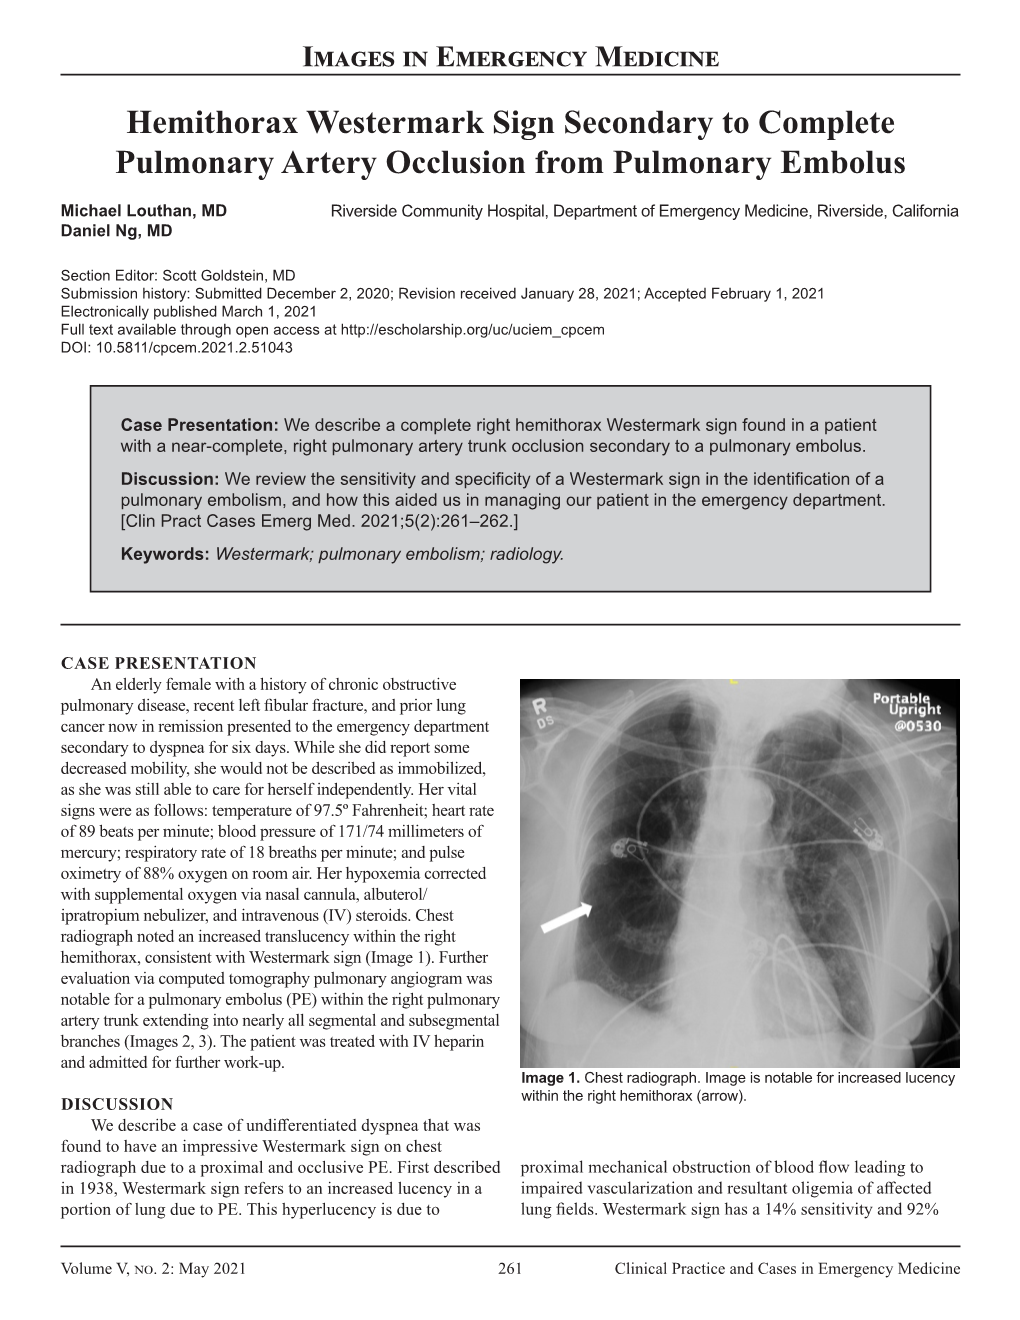 Hemithorax Westermark Sign Secondary to Complete Pulmonary Artery Occlusion from Pulmonary Embolus